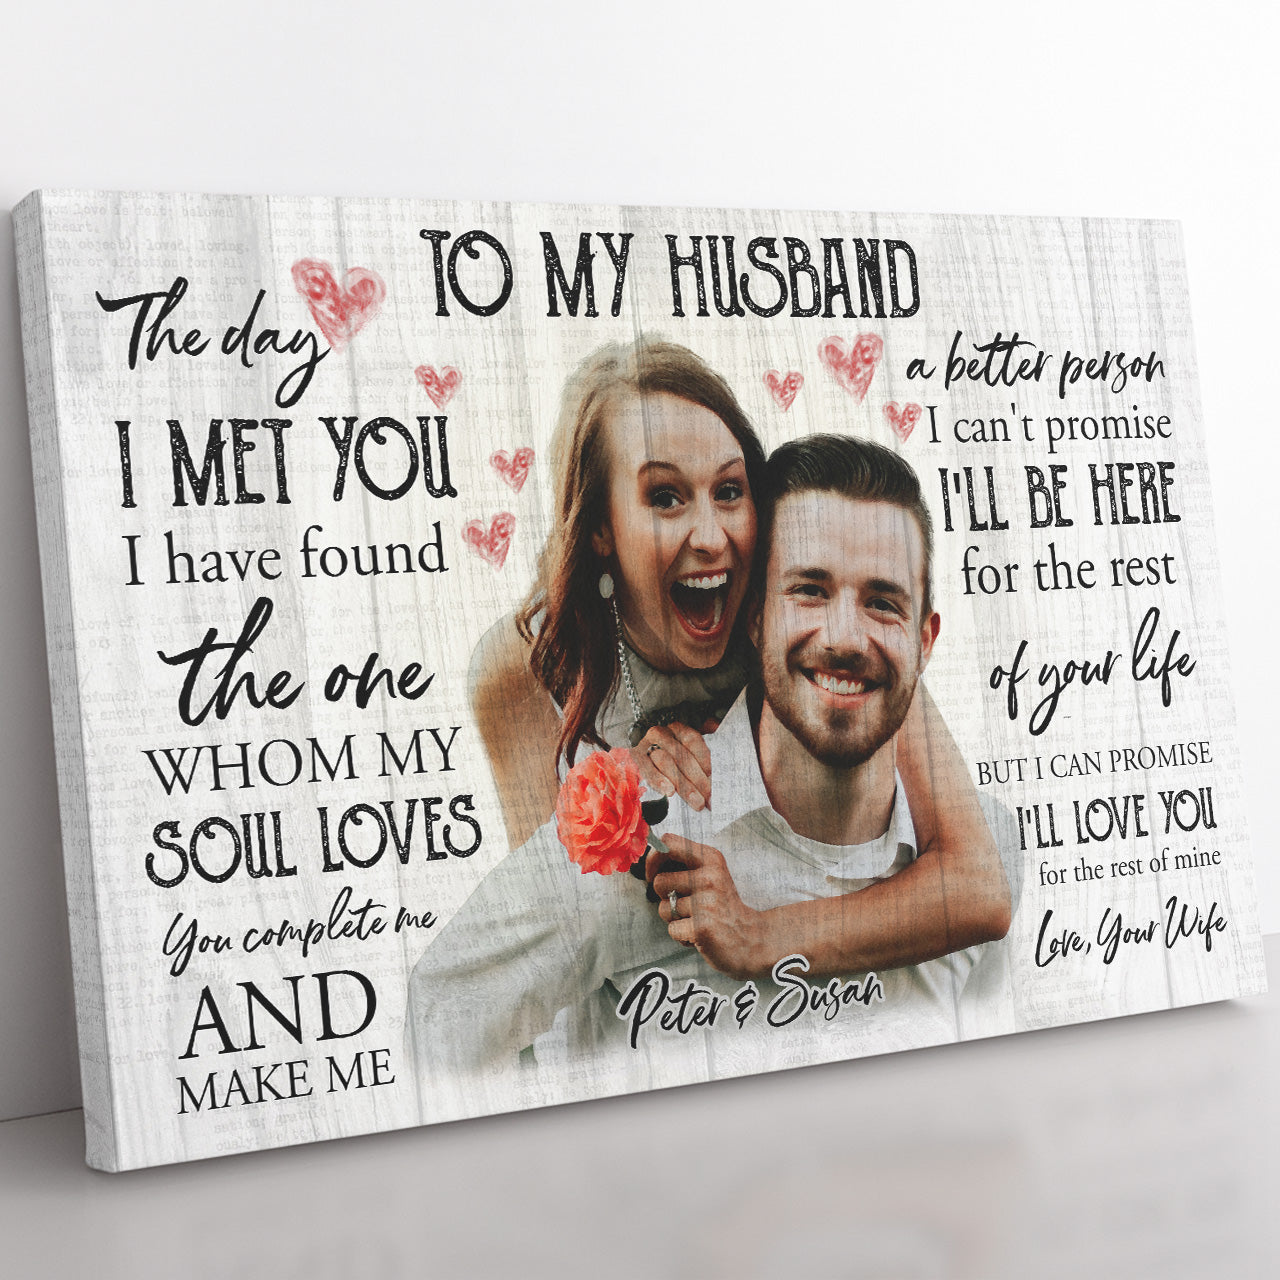 Personalized Canvas Gift Ideas to My Husband, The Day I Met You 20121801